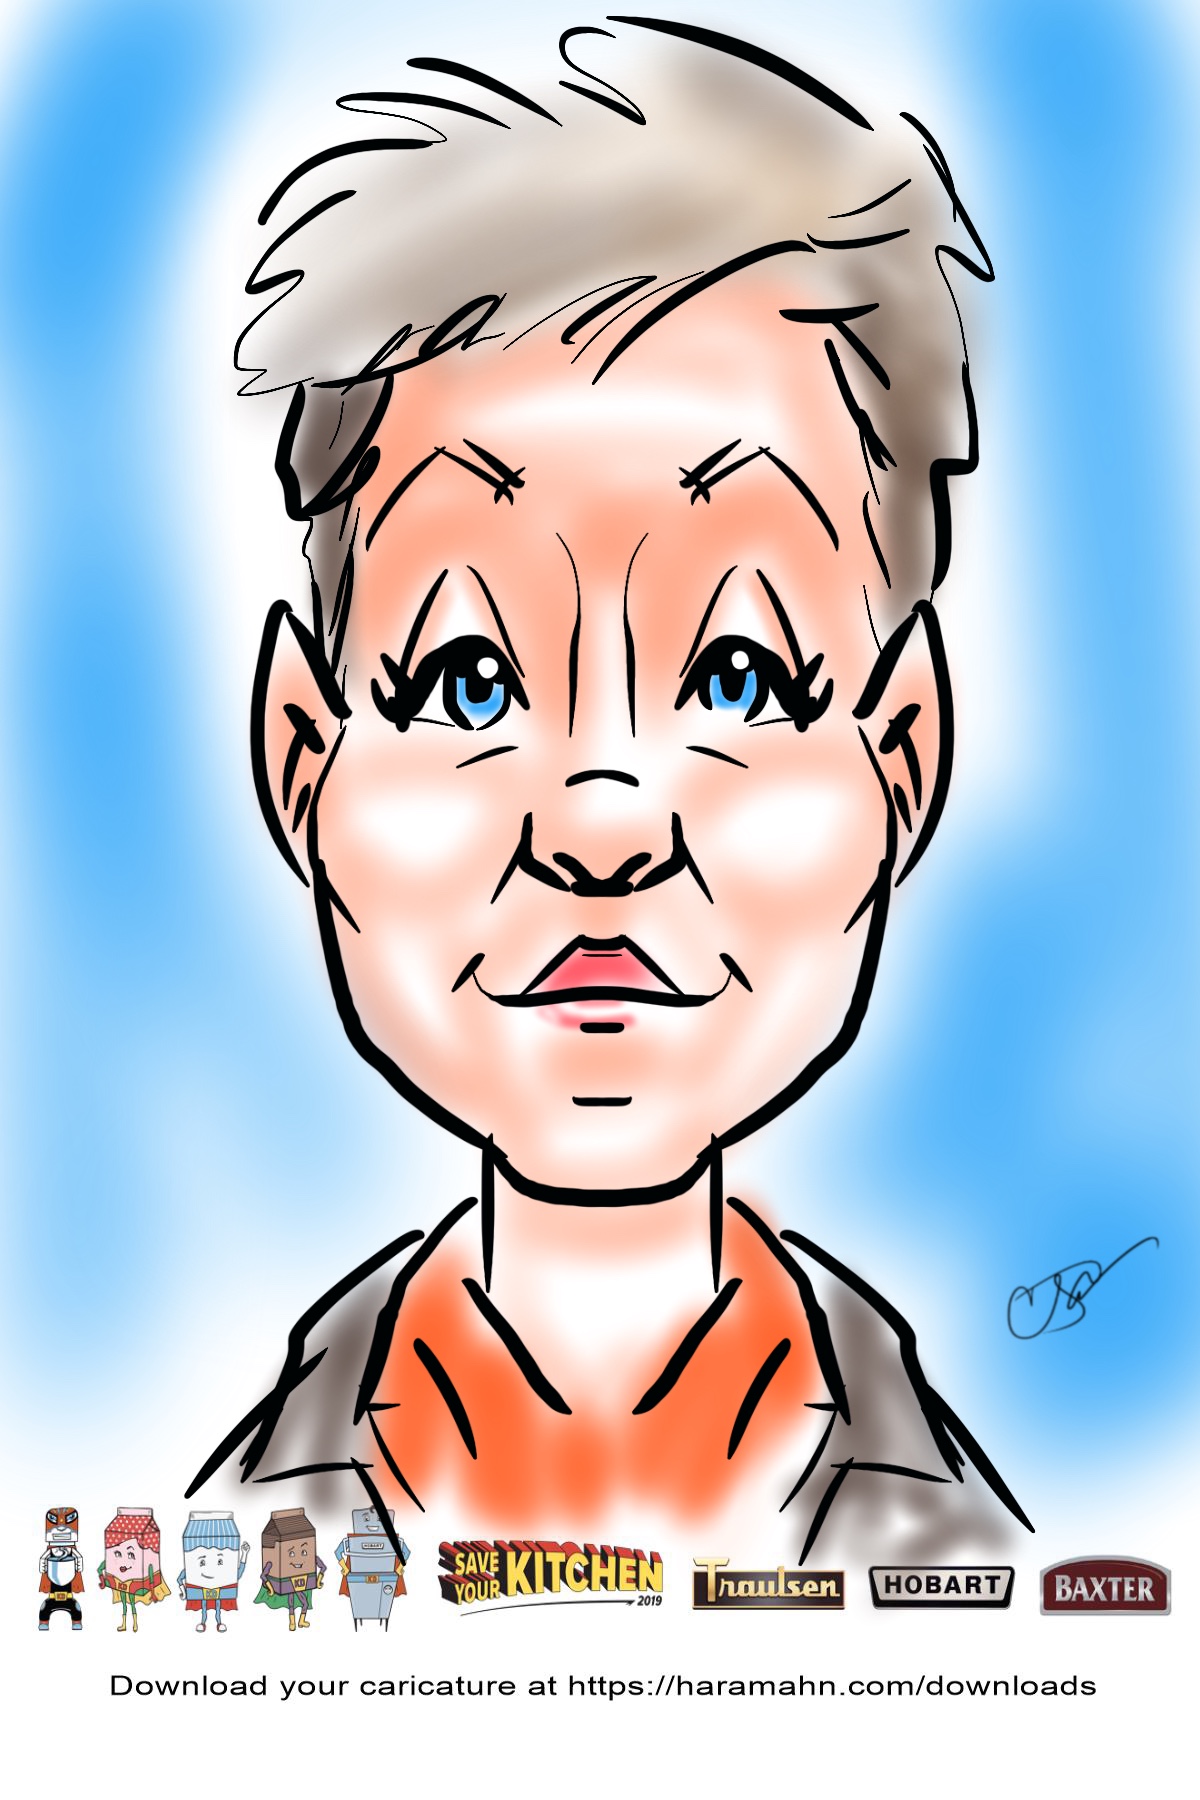 Digital caricature of a woman